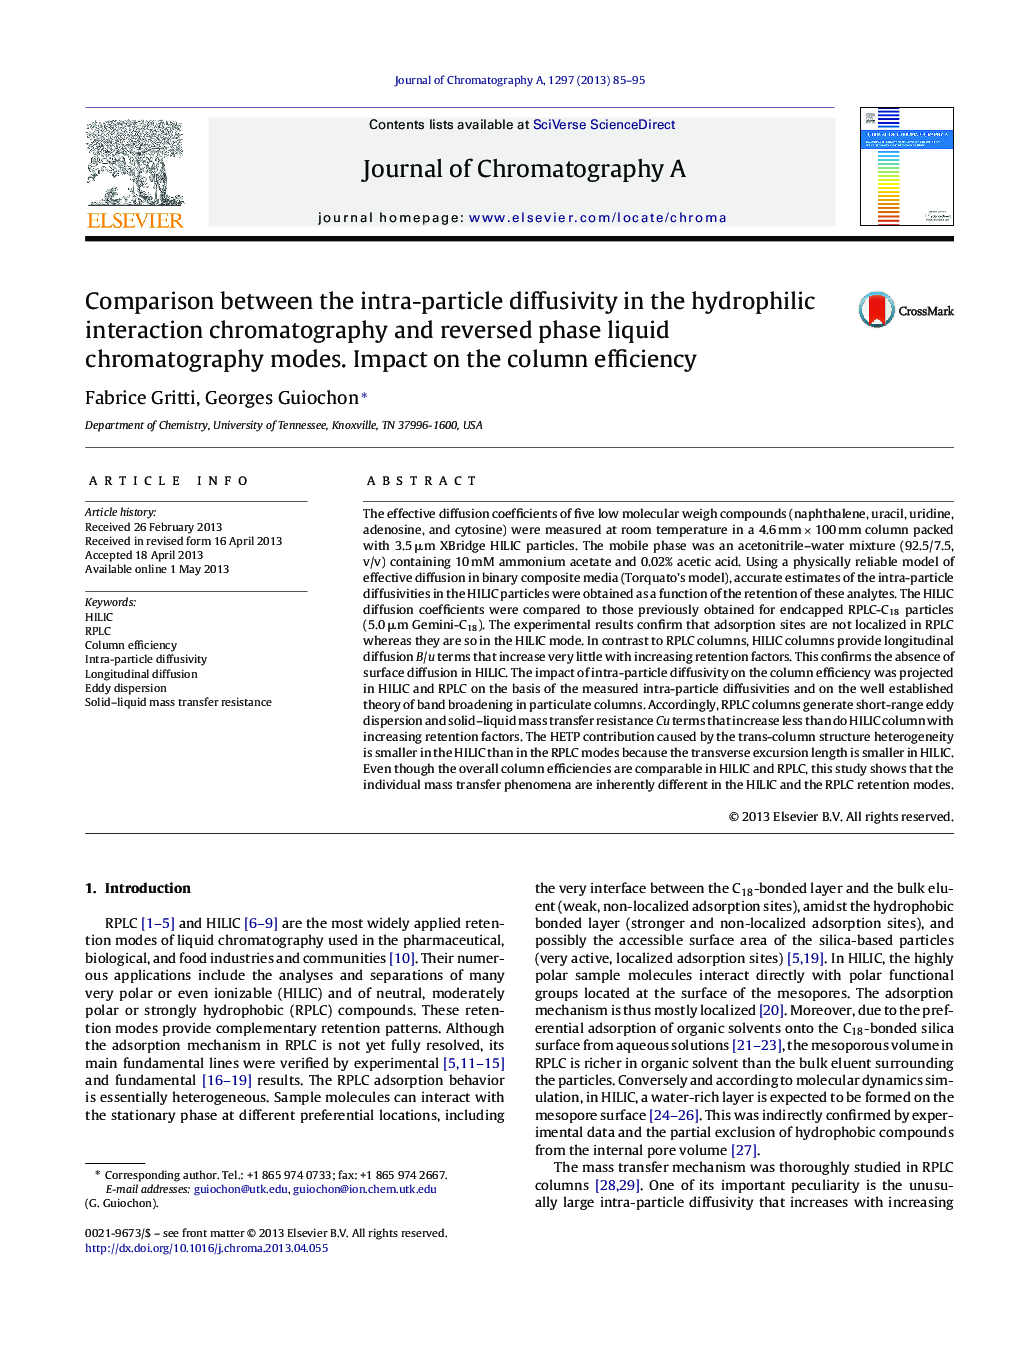 Comparison between the intra-particle diffusivity in the hydrophilic interaction chromatography and reversed phase liquid chromatography modes. Impact on the column efficiency